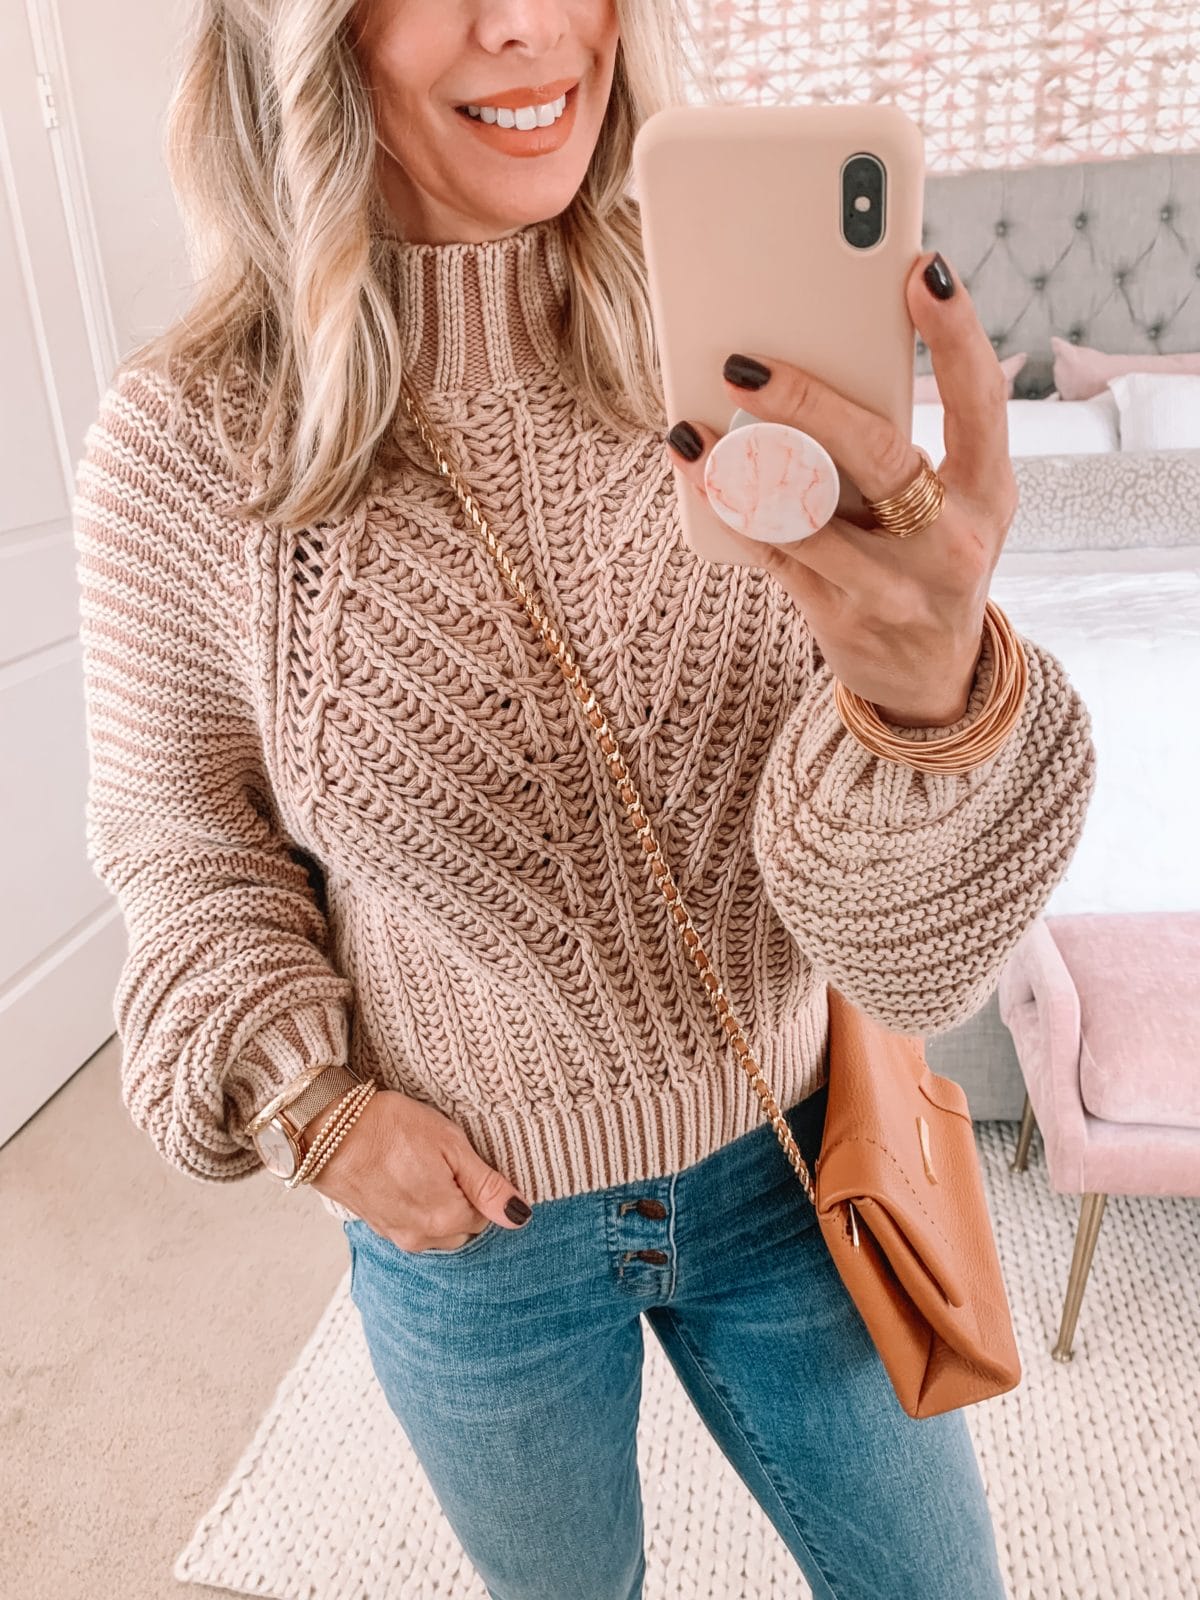 Dressing Room Finds Nordstrom, Chunky Knit Sweater, Button Fly Jeans, Booties, Crossbody